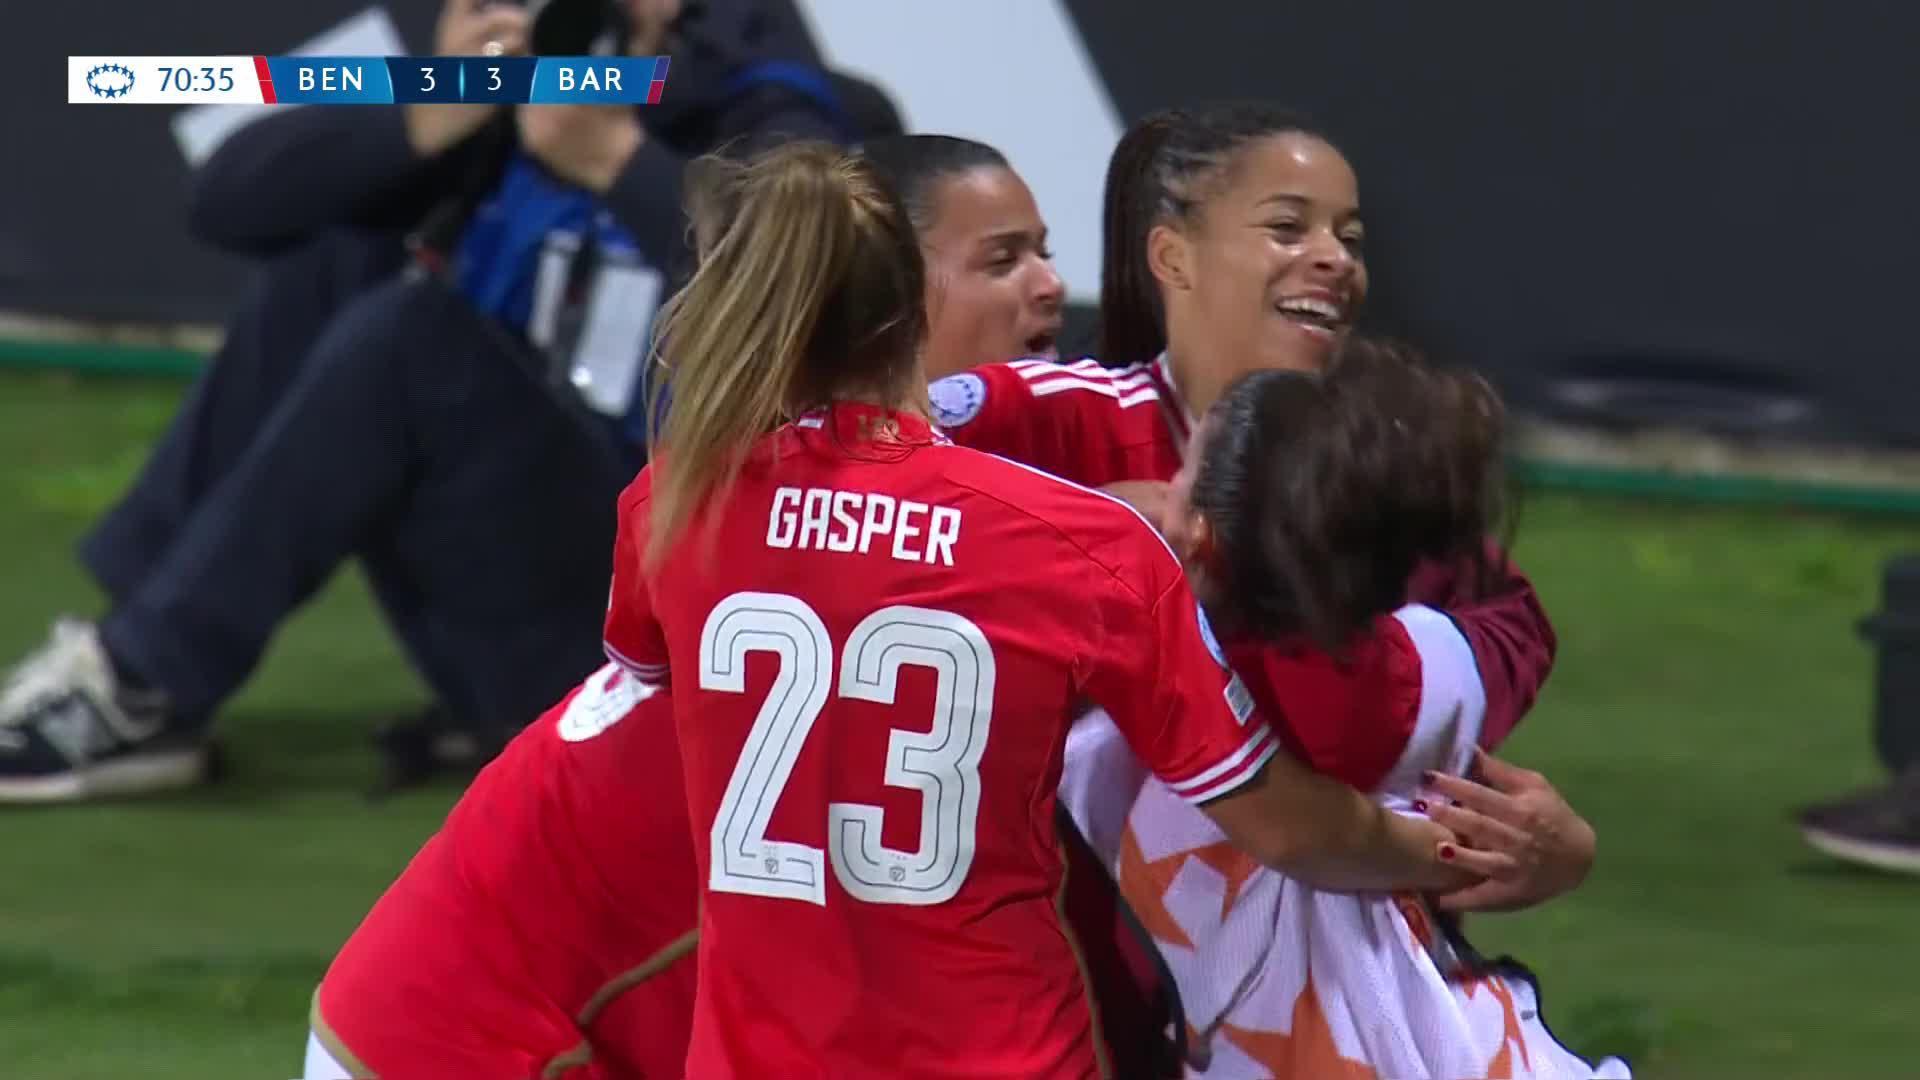 AN ABSOLUTELY INSANE TEAM GOAL FROM BENFICA! Jessica Silva finishes the effort. 🚀Watch the UWCL LIVE for FREE on DAZN 👉  #UWCLonDAZN